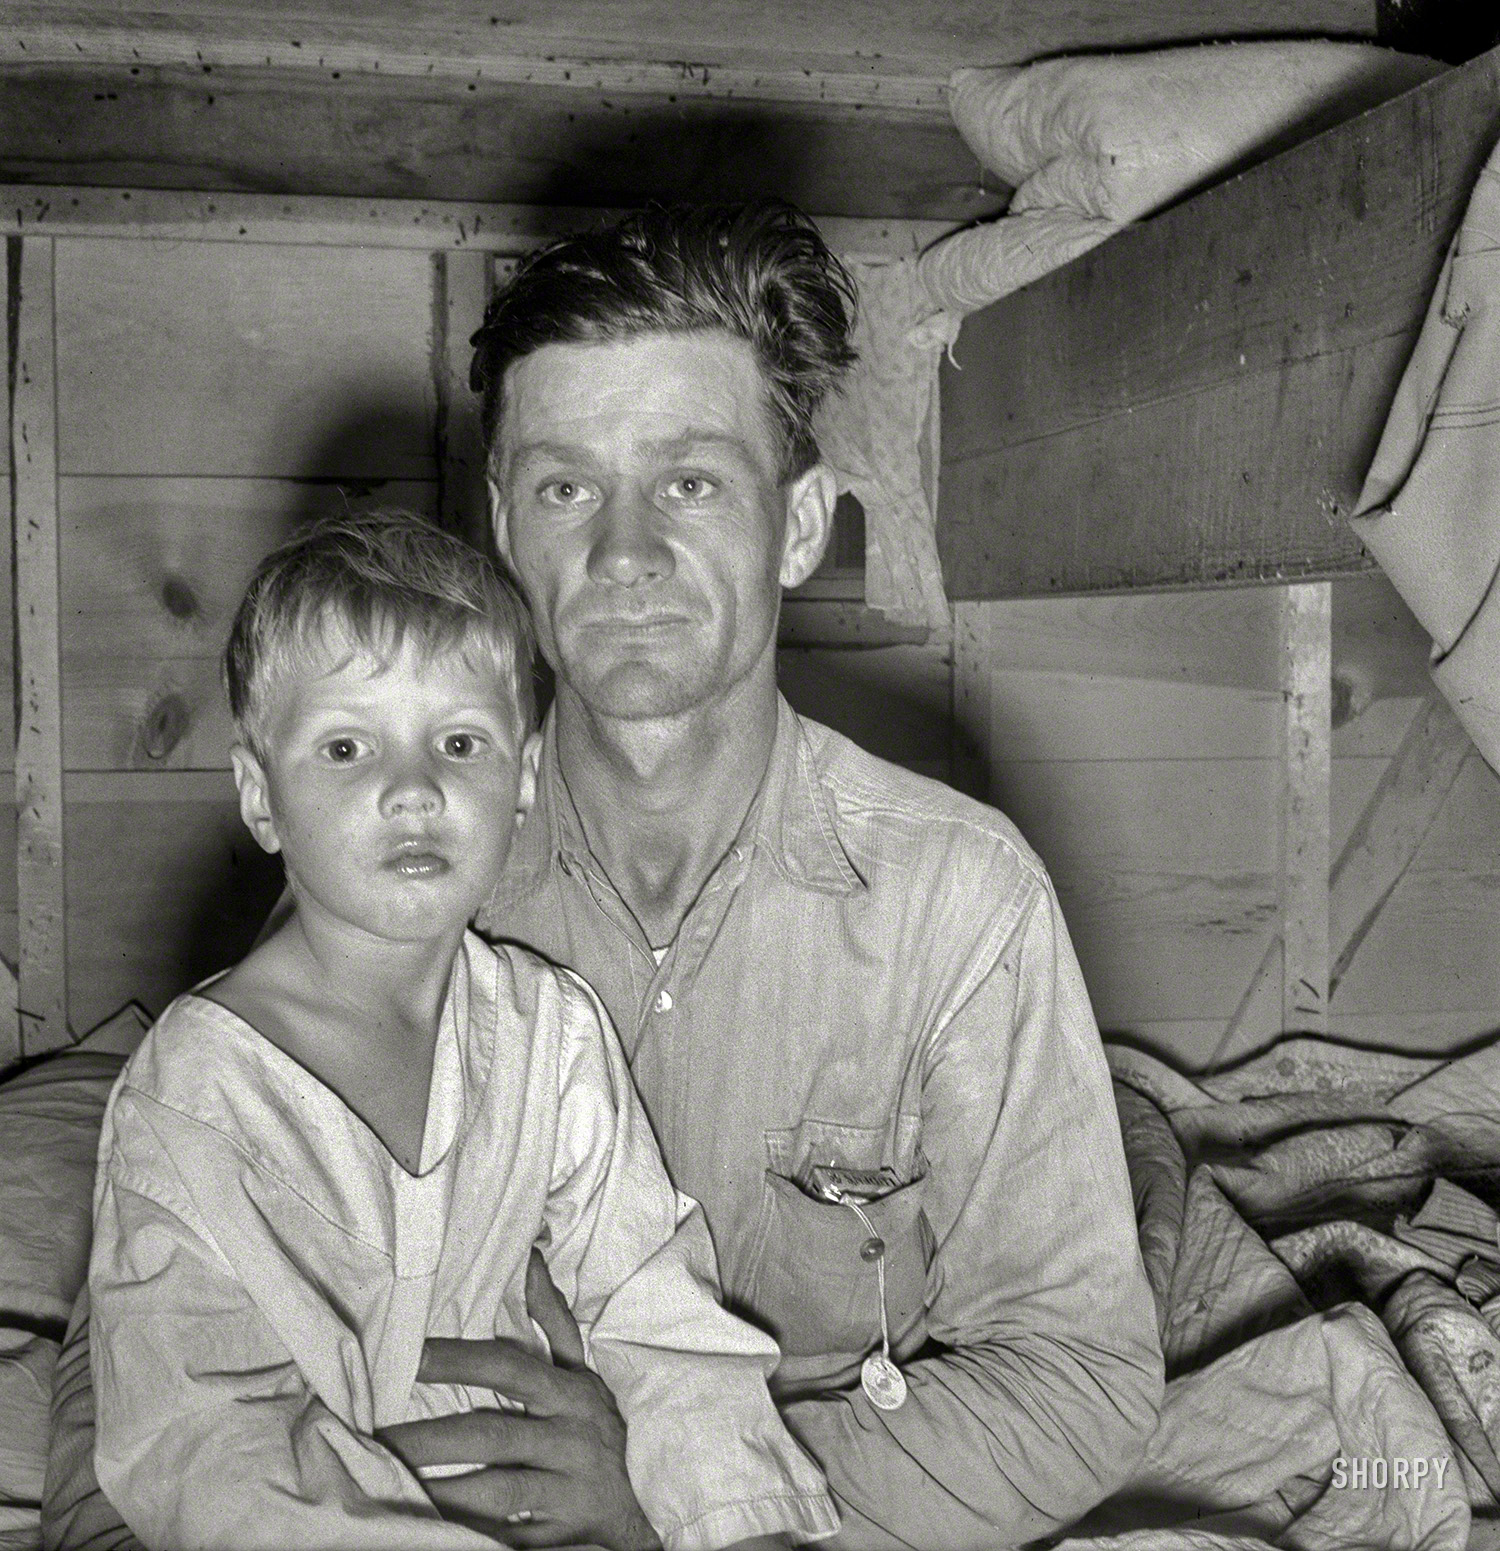 October 1939. "He brought his family to the West in a homemade trailer from Texas five months ago. Photograph made after supper. Boy sick. Father has work now in potato field. Merrill, Klamath County, Oregon. In mobile unit, FSA camp." Photo by Dorothea Lange for the Farm Security Administration. View full size.